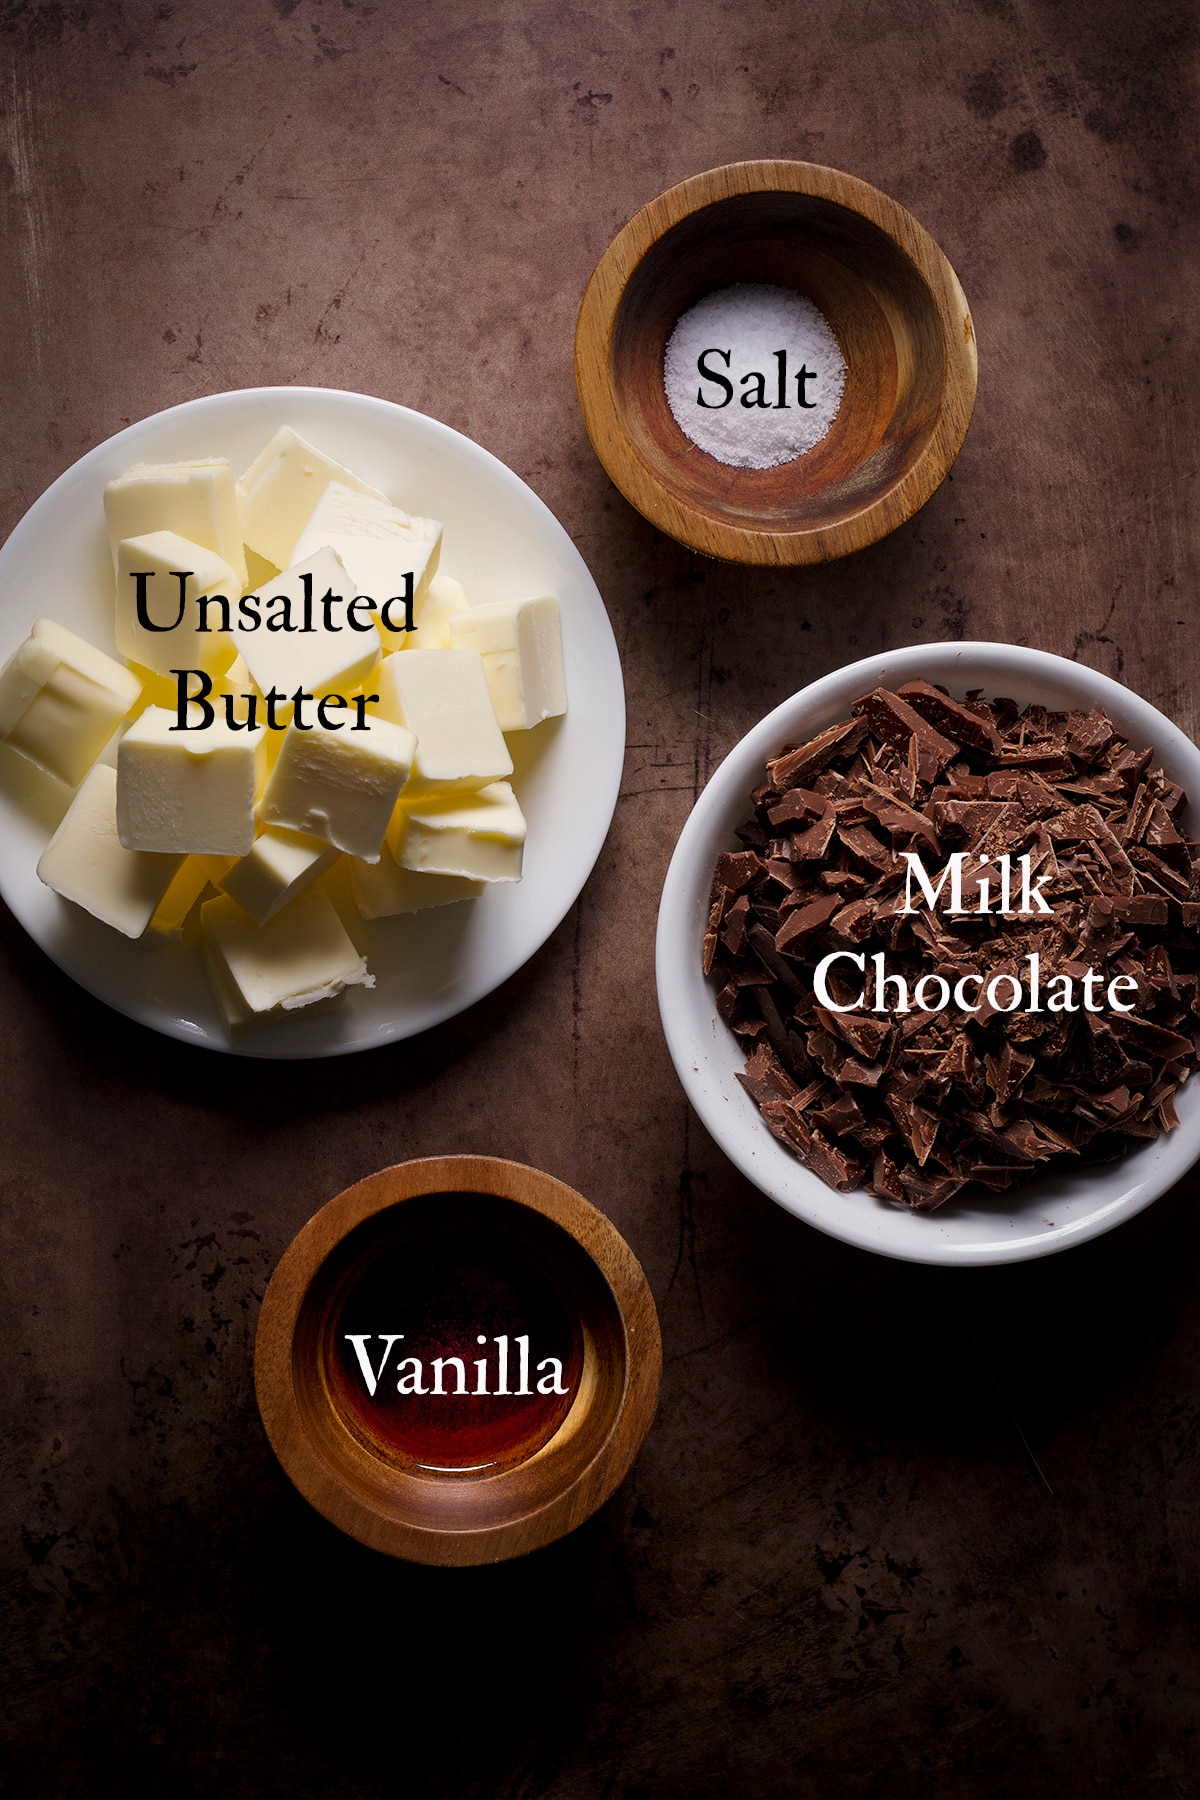 All the ingredients needed to prepare milk chocolate buttercream.